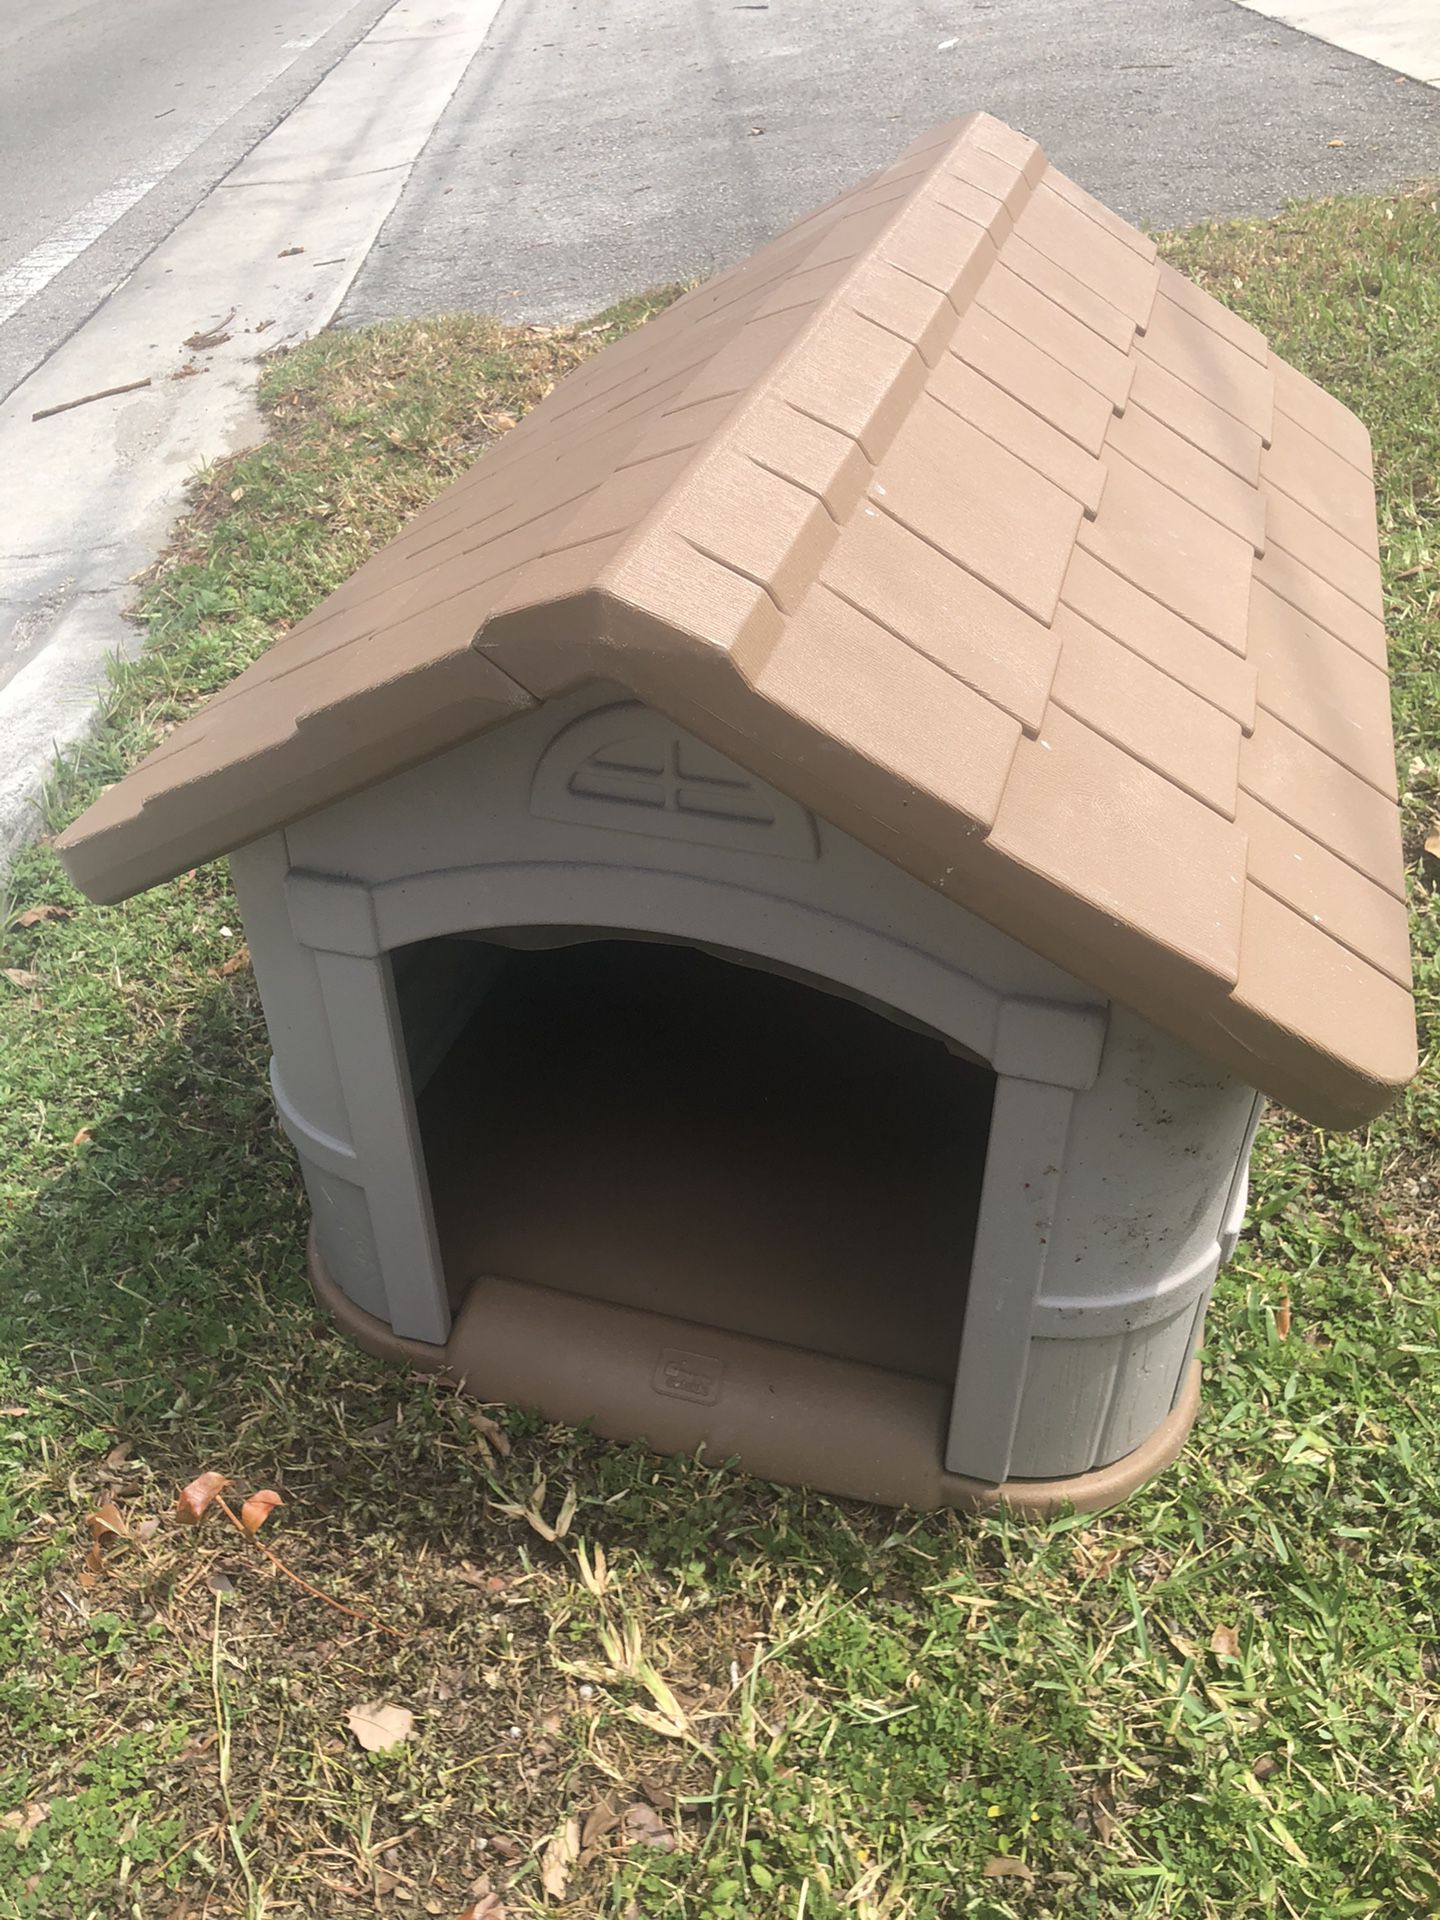 Plastic dog house not new but in good condition.